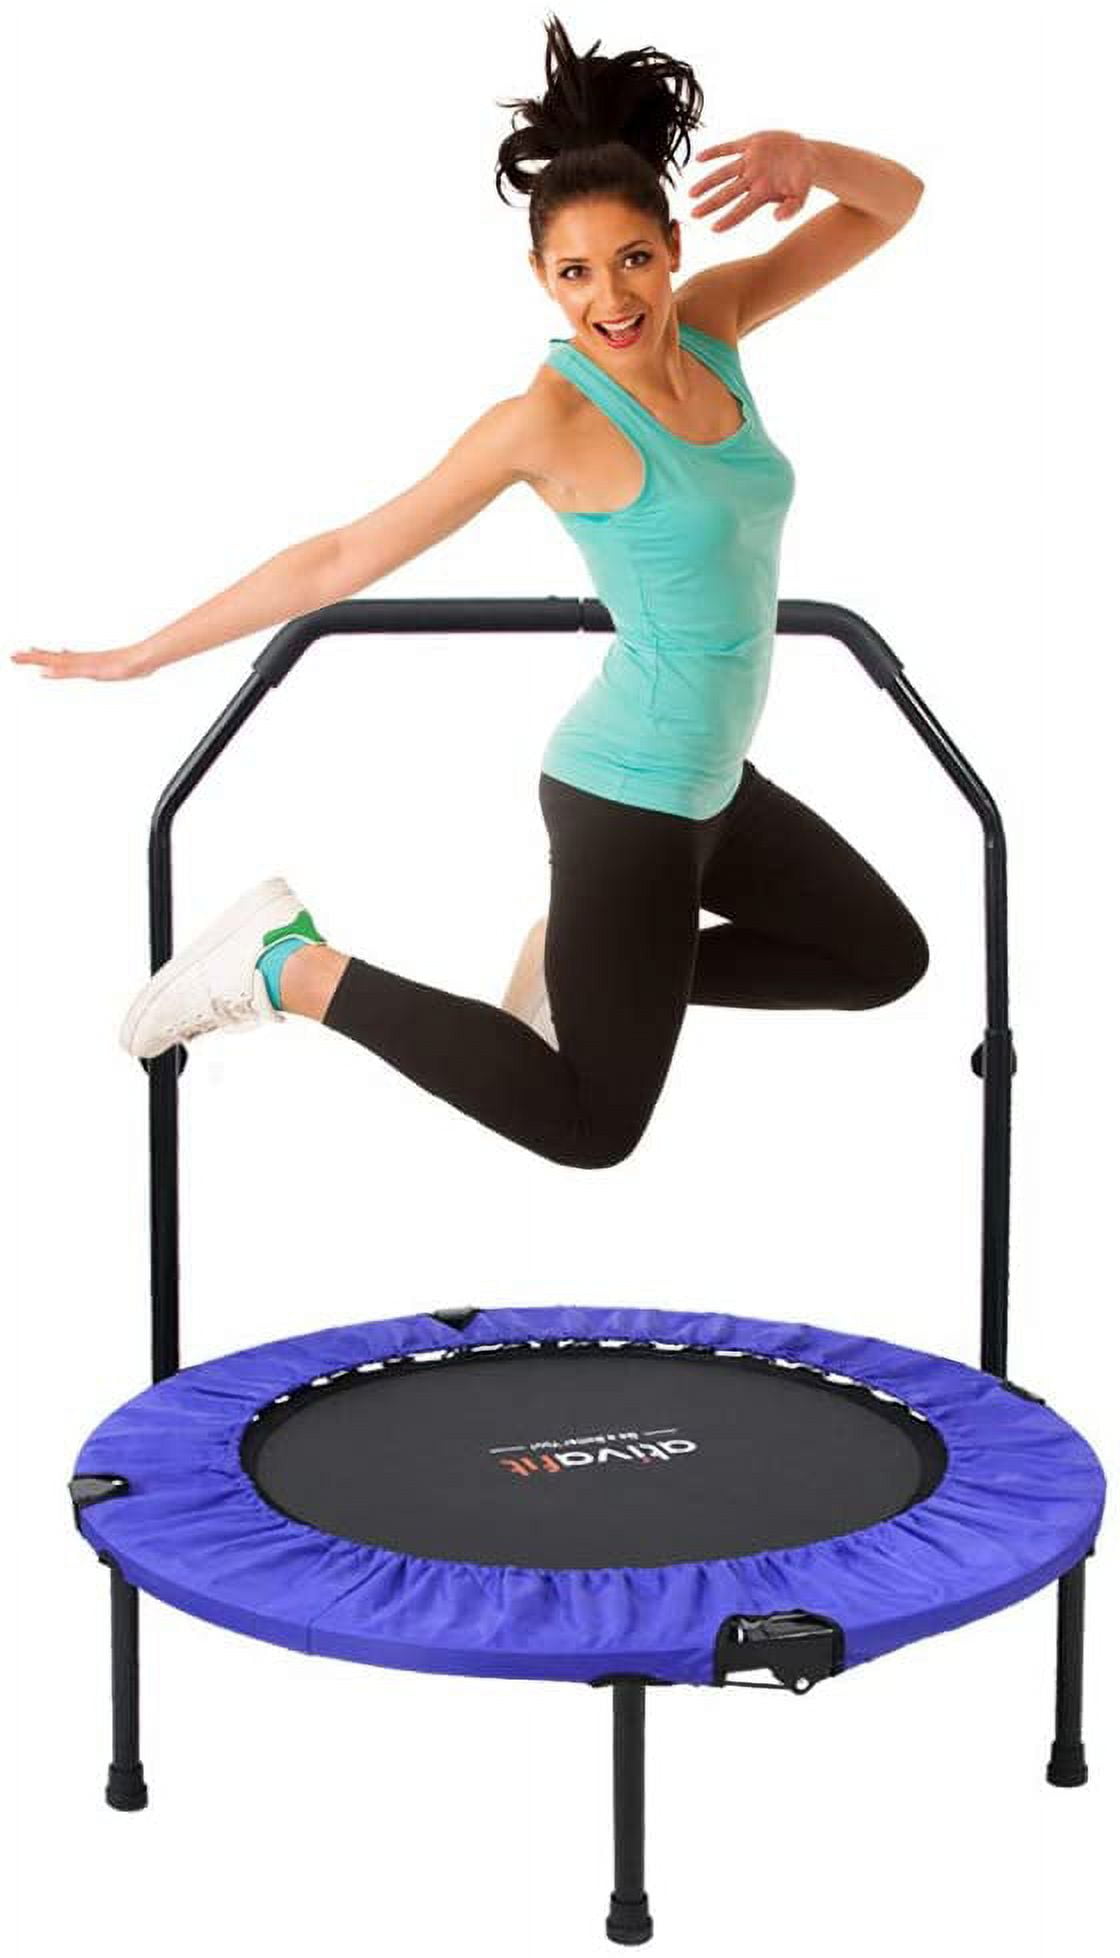 ATIVAFIT 40 Foldable Trampoline Mini Exercise Rebounder with Adjustable  Foam Handle Great for Body Fitness Training Indoor/Garden/Workout 